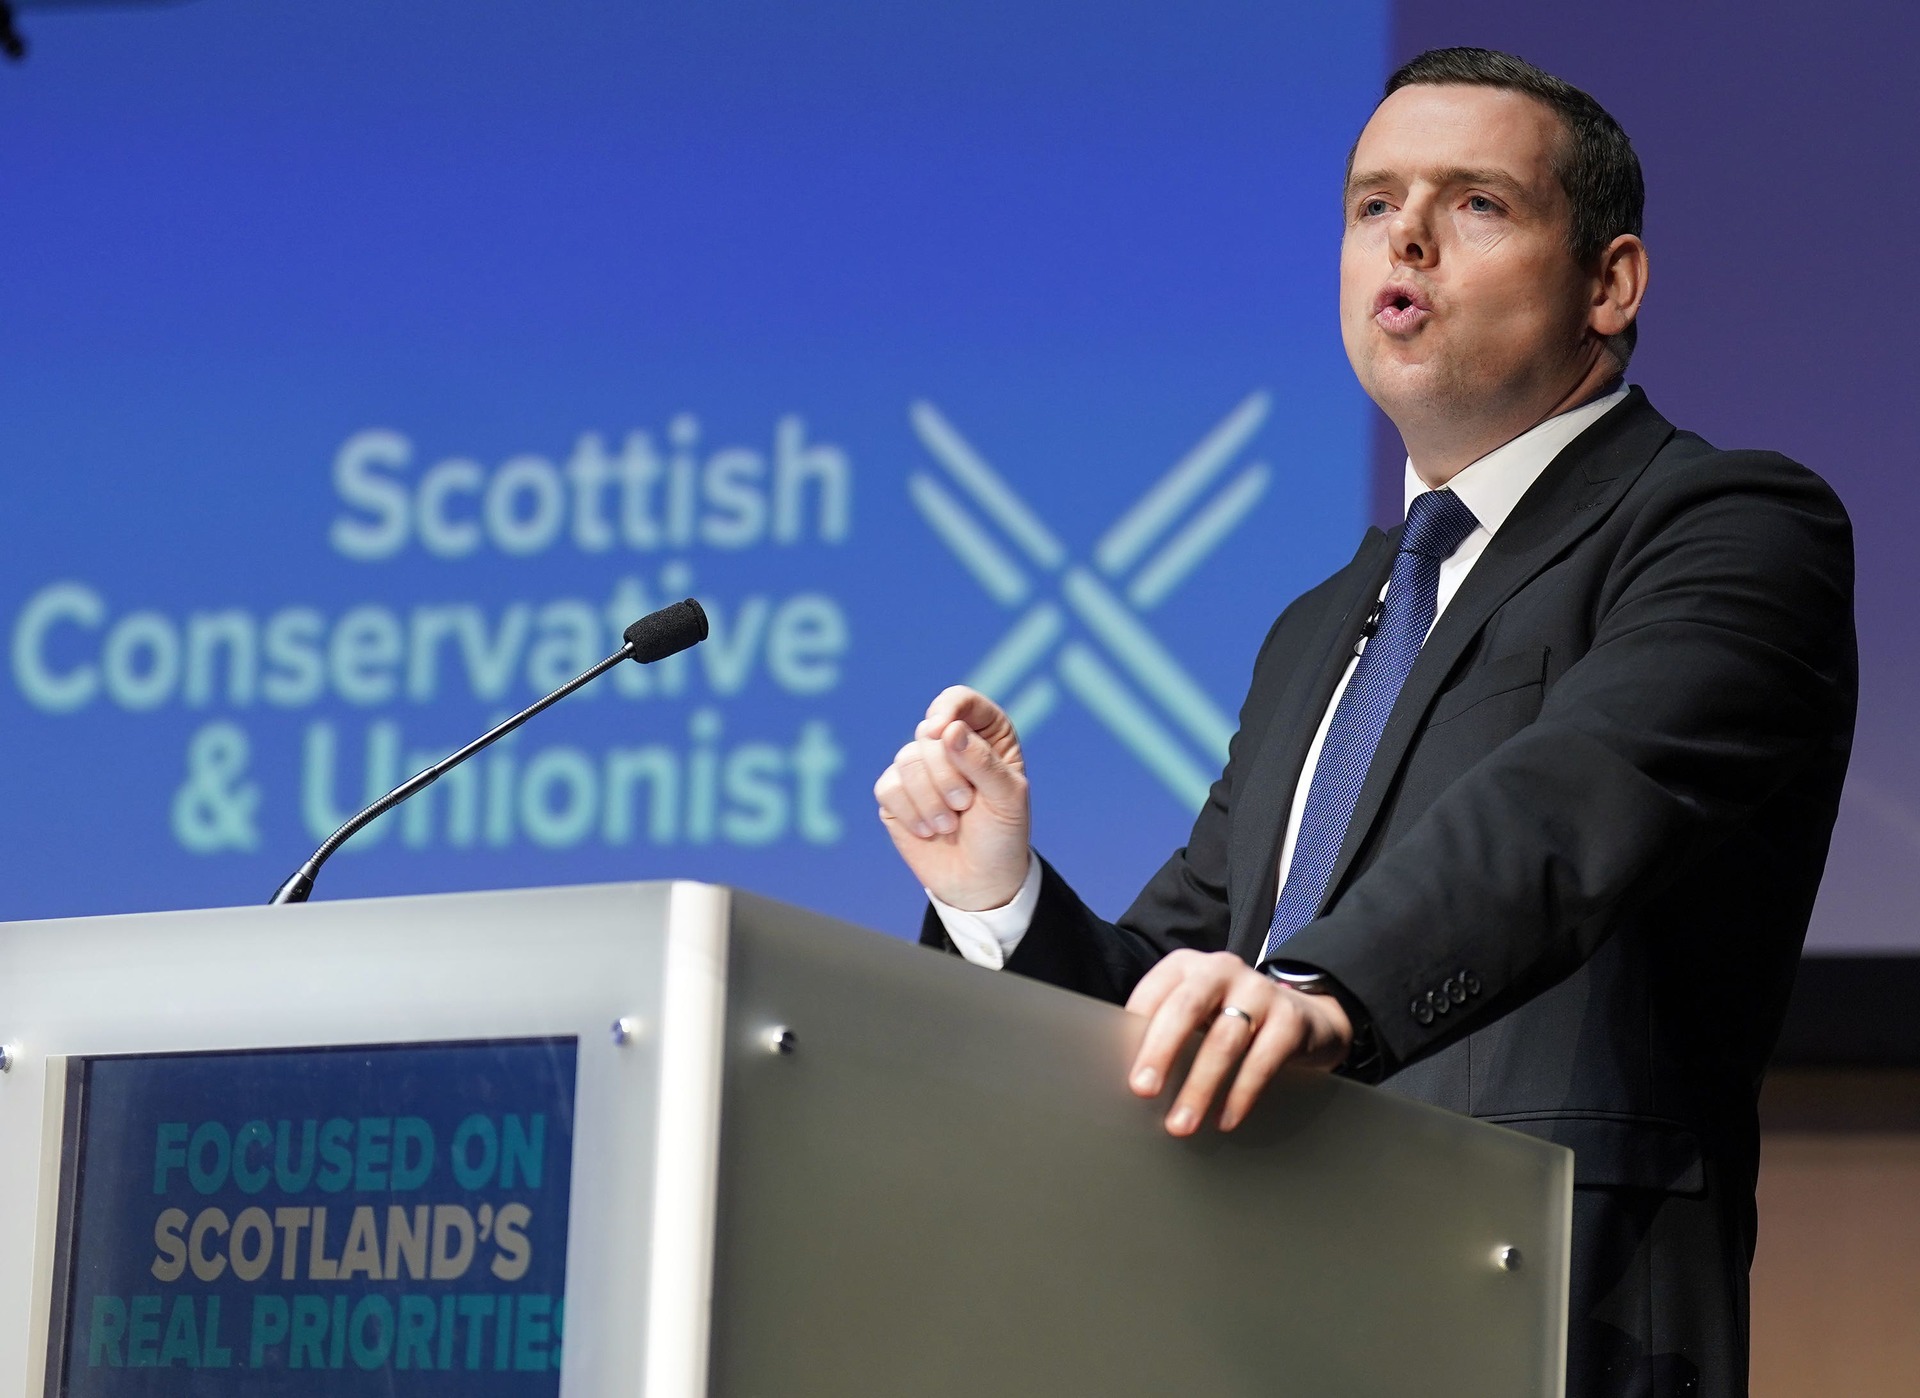 Douglas Ross said Scotland was the most heavily-taxed part of the UK.